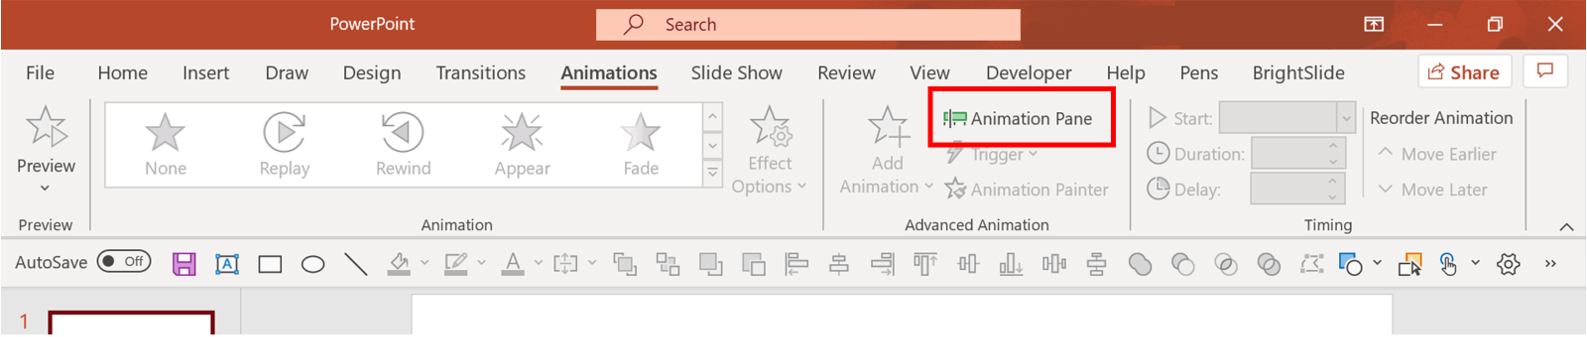 Screenshot of the PowerPoint ribbon with the animation Pane option highlighted